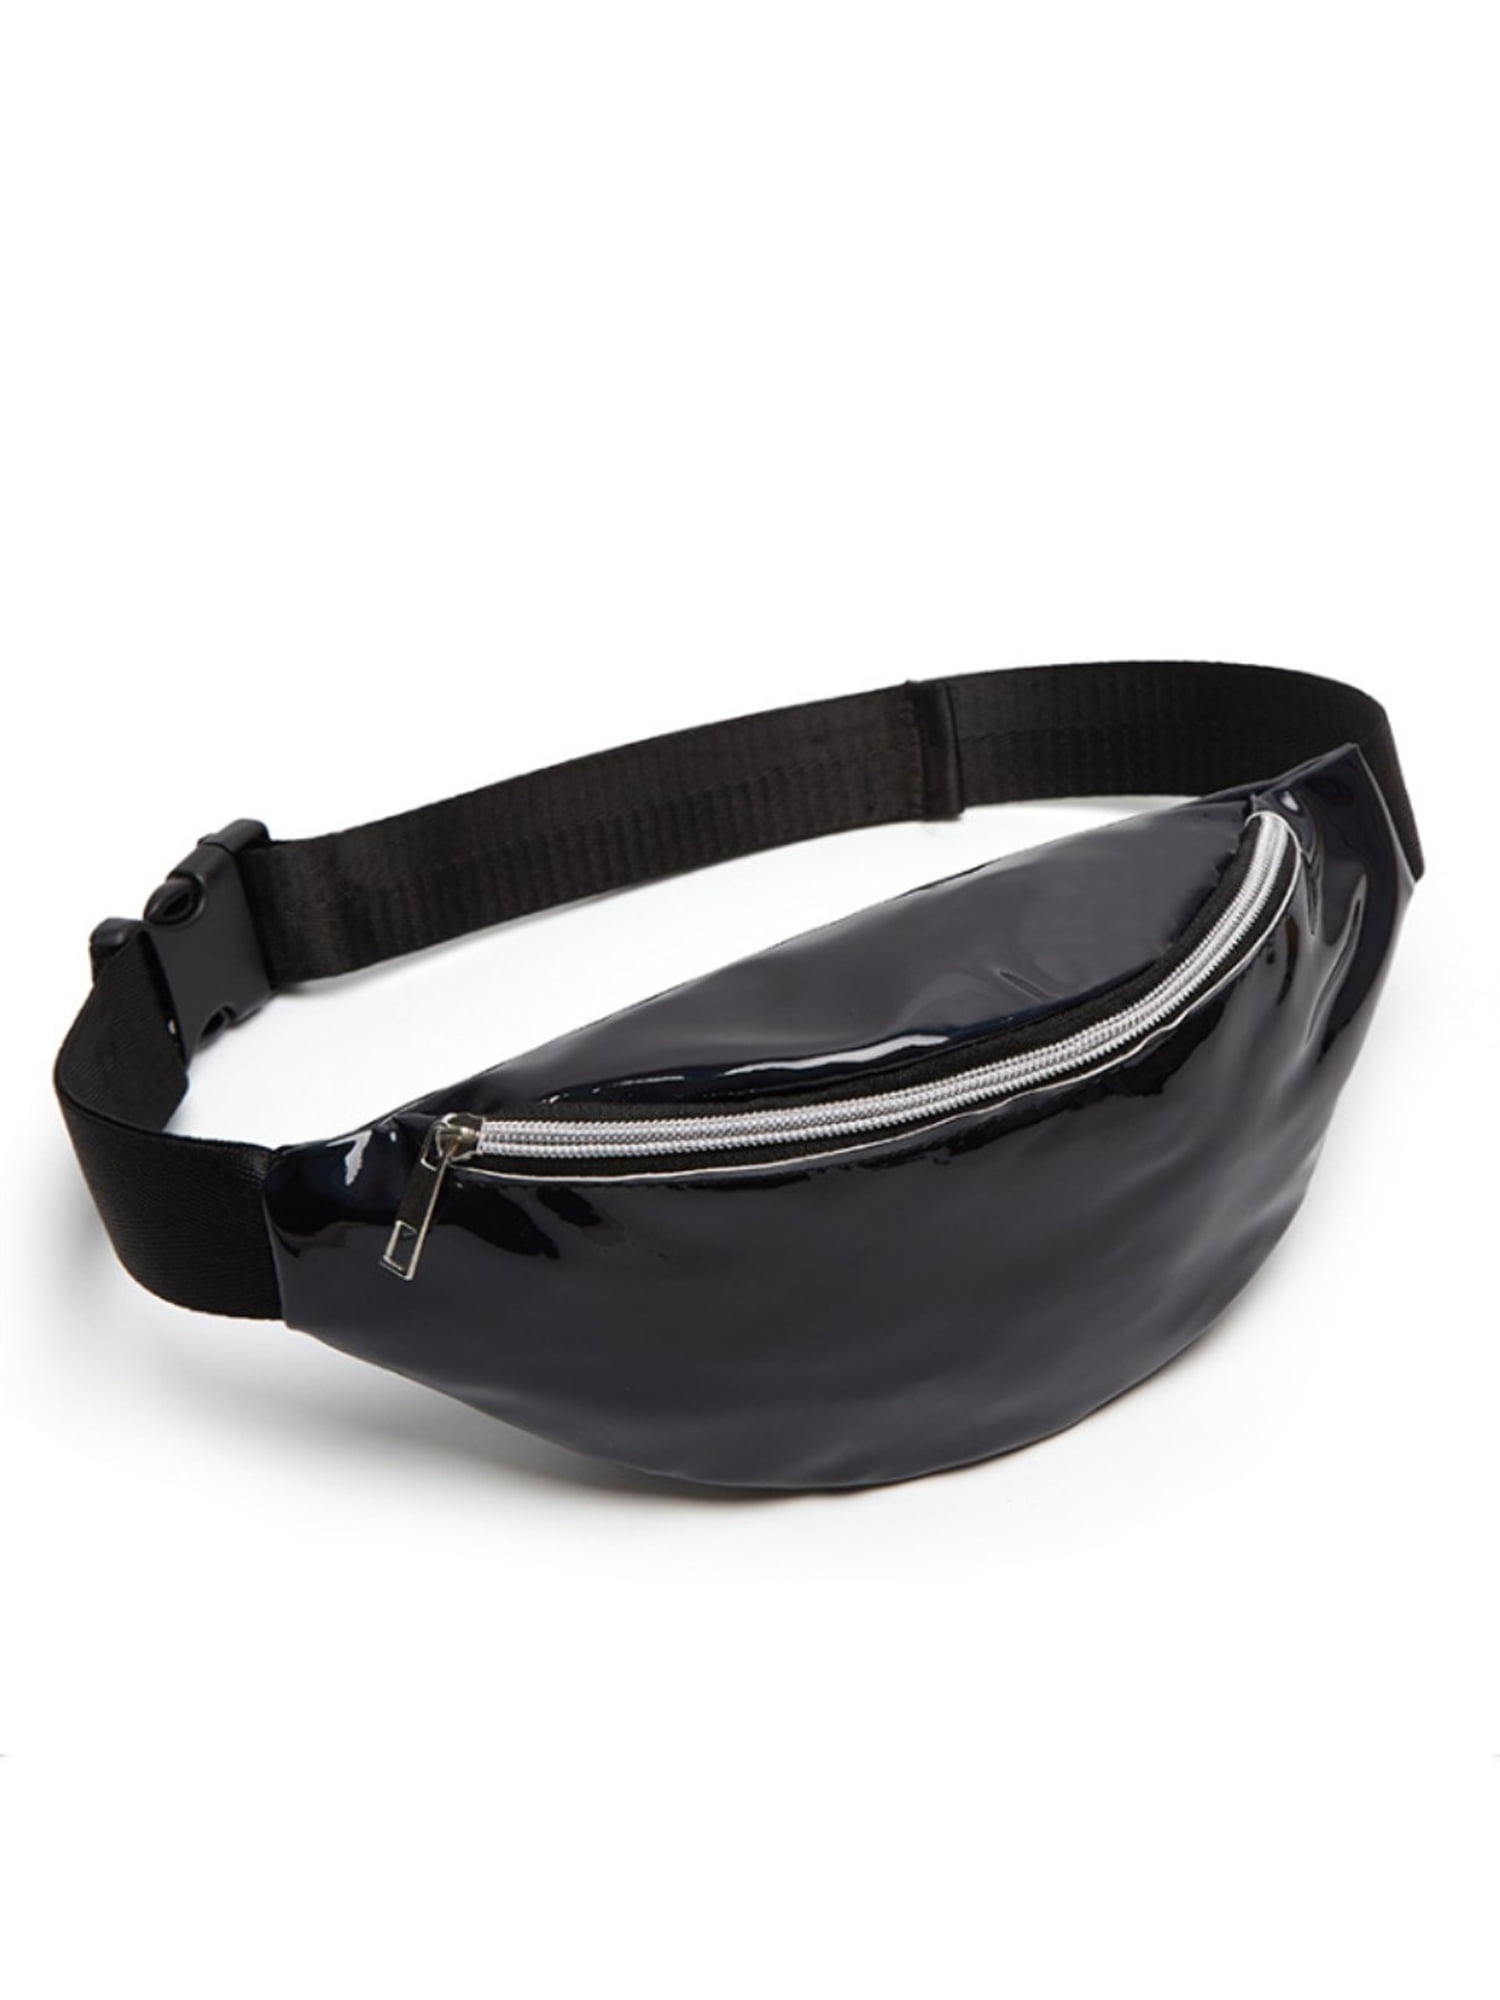 Womens Mens Small Bum Bags Fanny Pack Leather Festival Travel Money Belt Pouch 